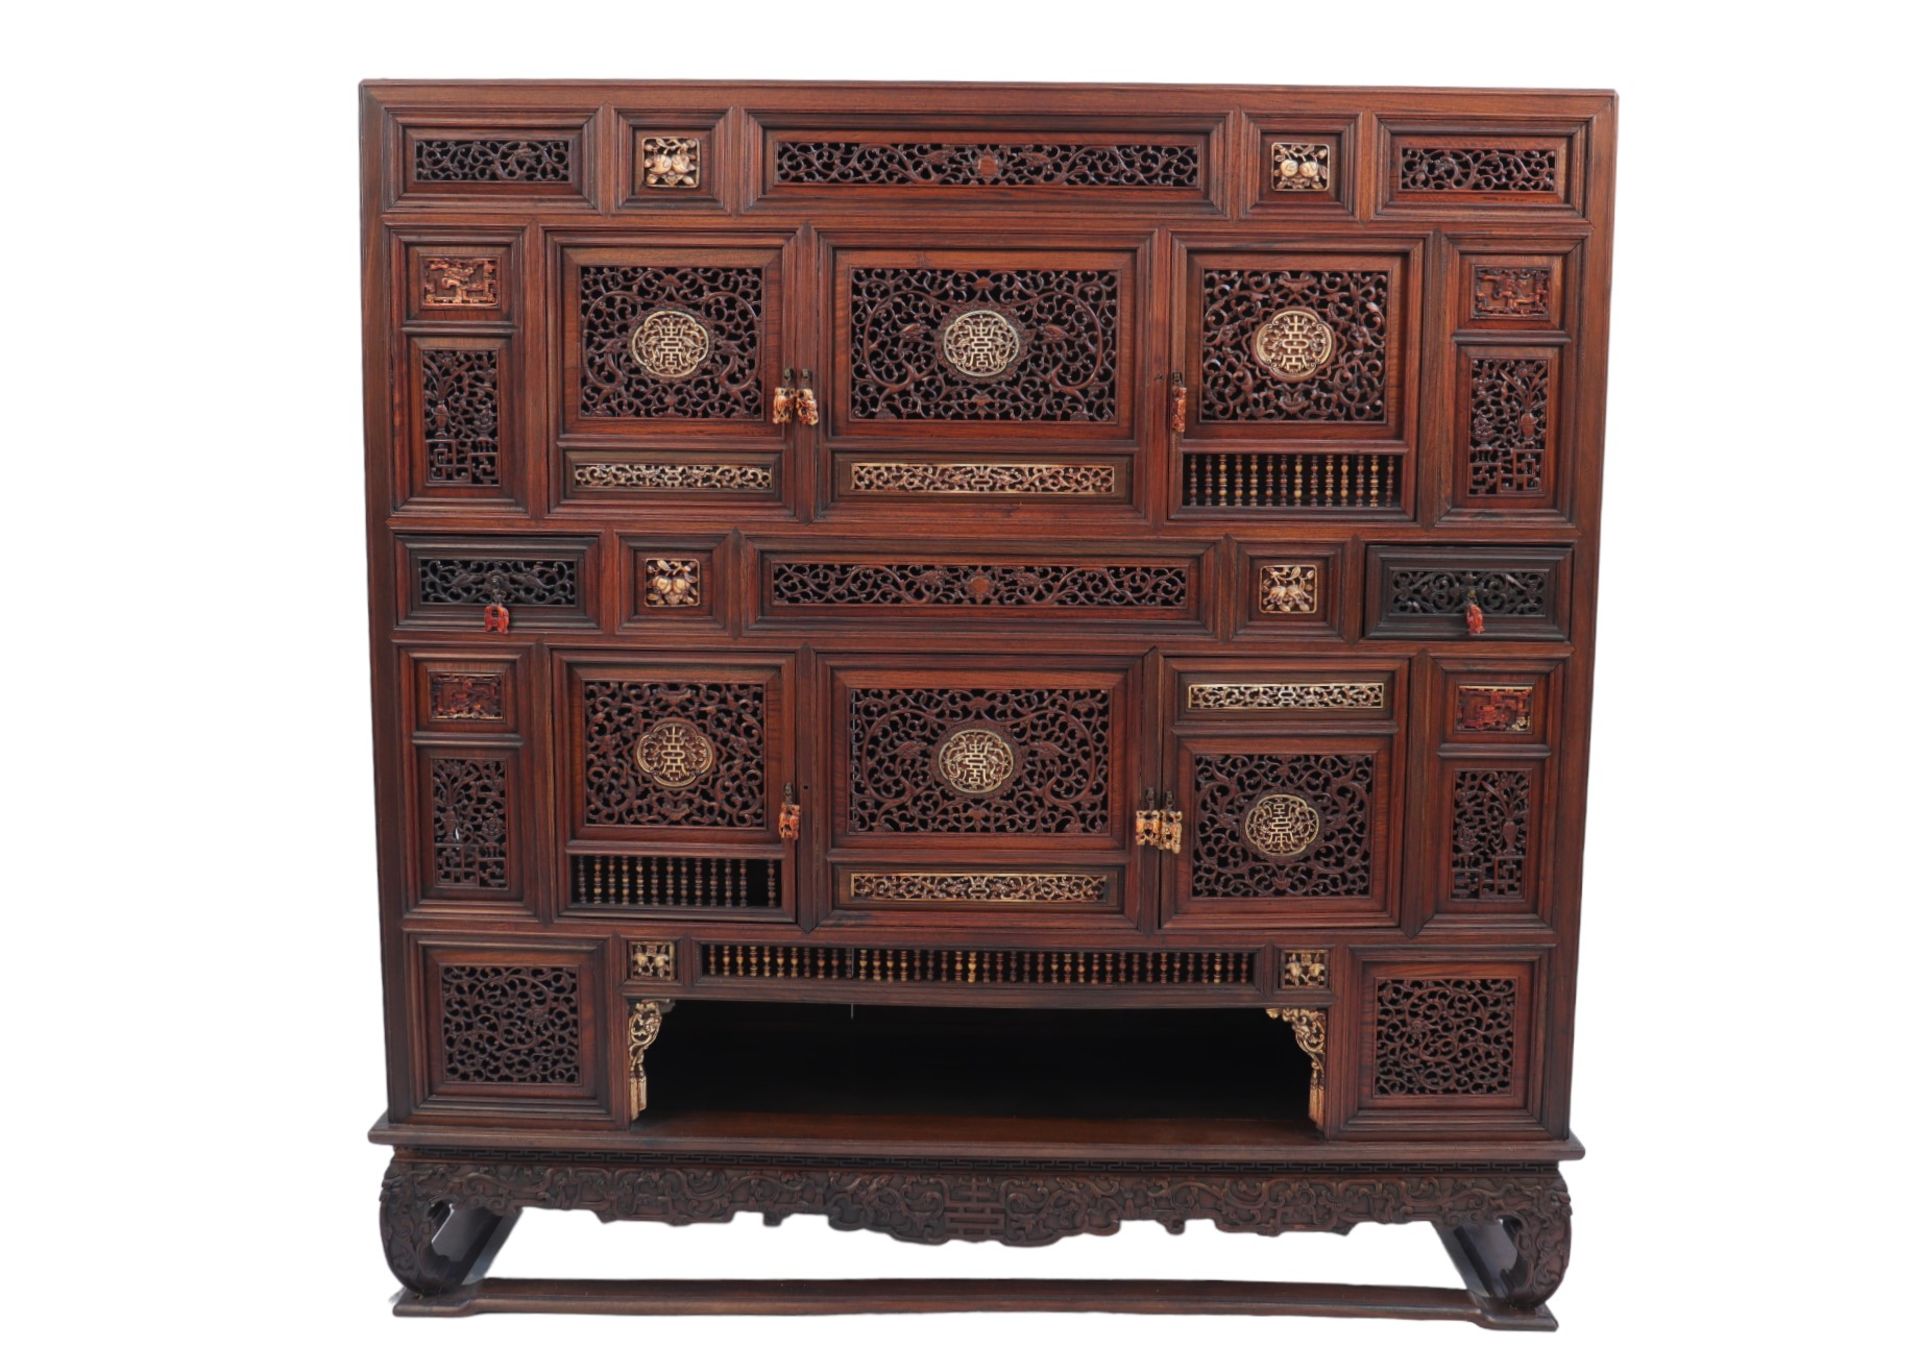 An exceptional piece of Chinese furniture decorated with dragons and bone inlays from the Qing perio - Image 3 of 4